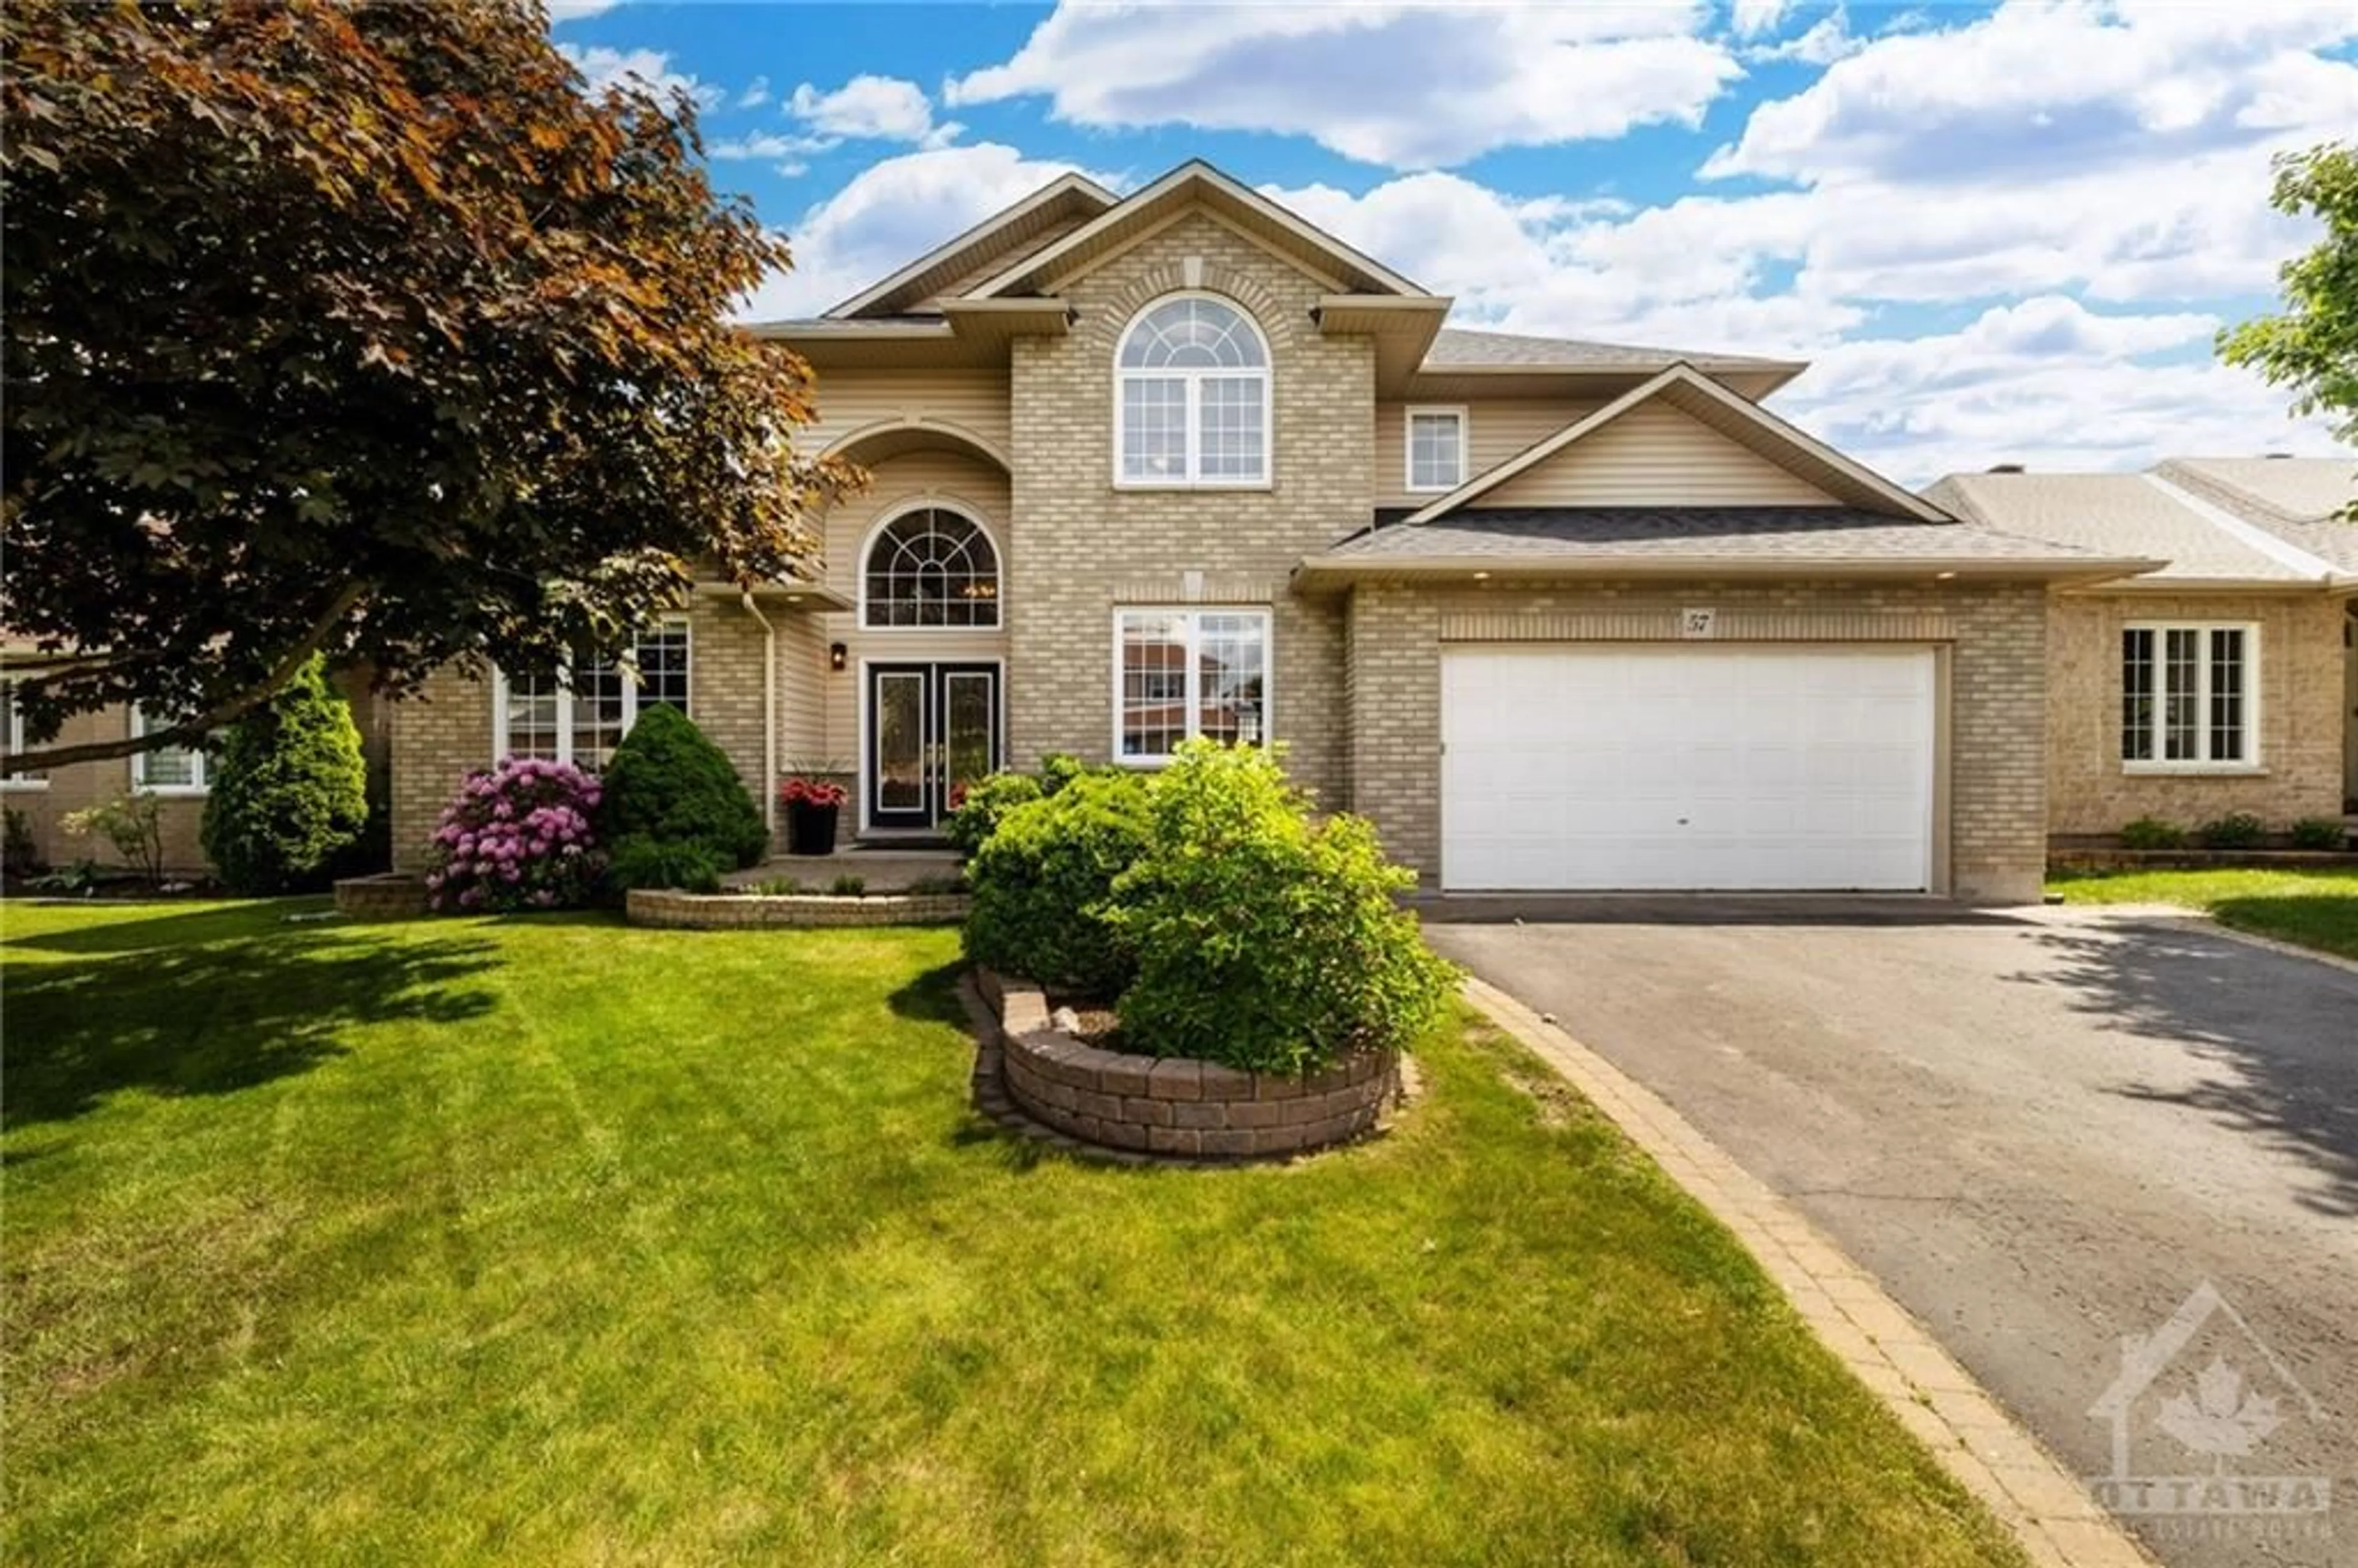 Frontside or backside of a home for 57 CINNABAR Way, Stittsville Ontario K2S 1Y9